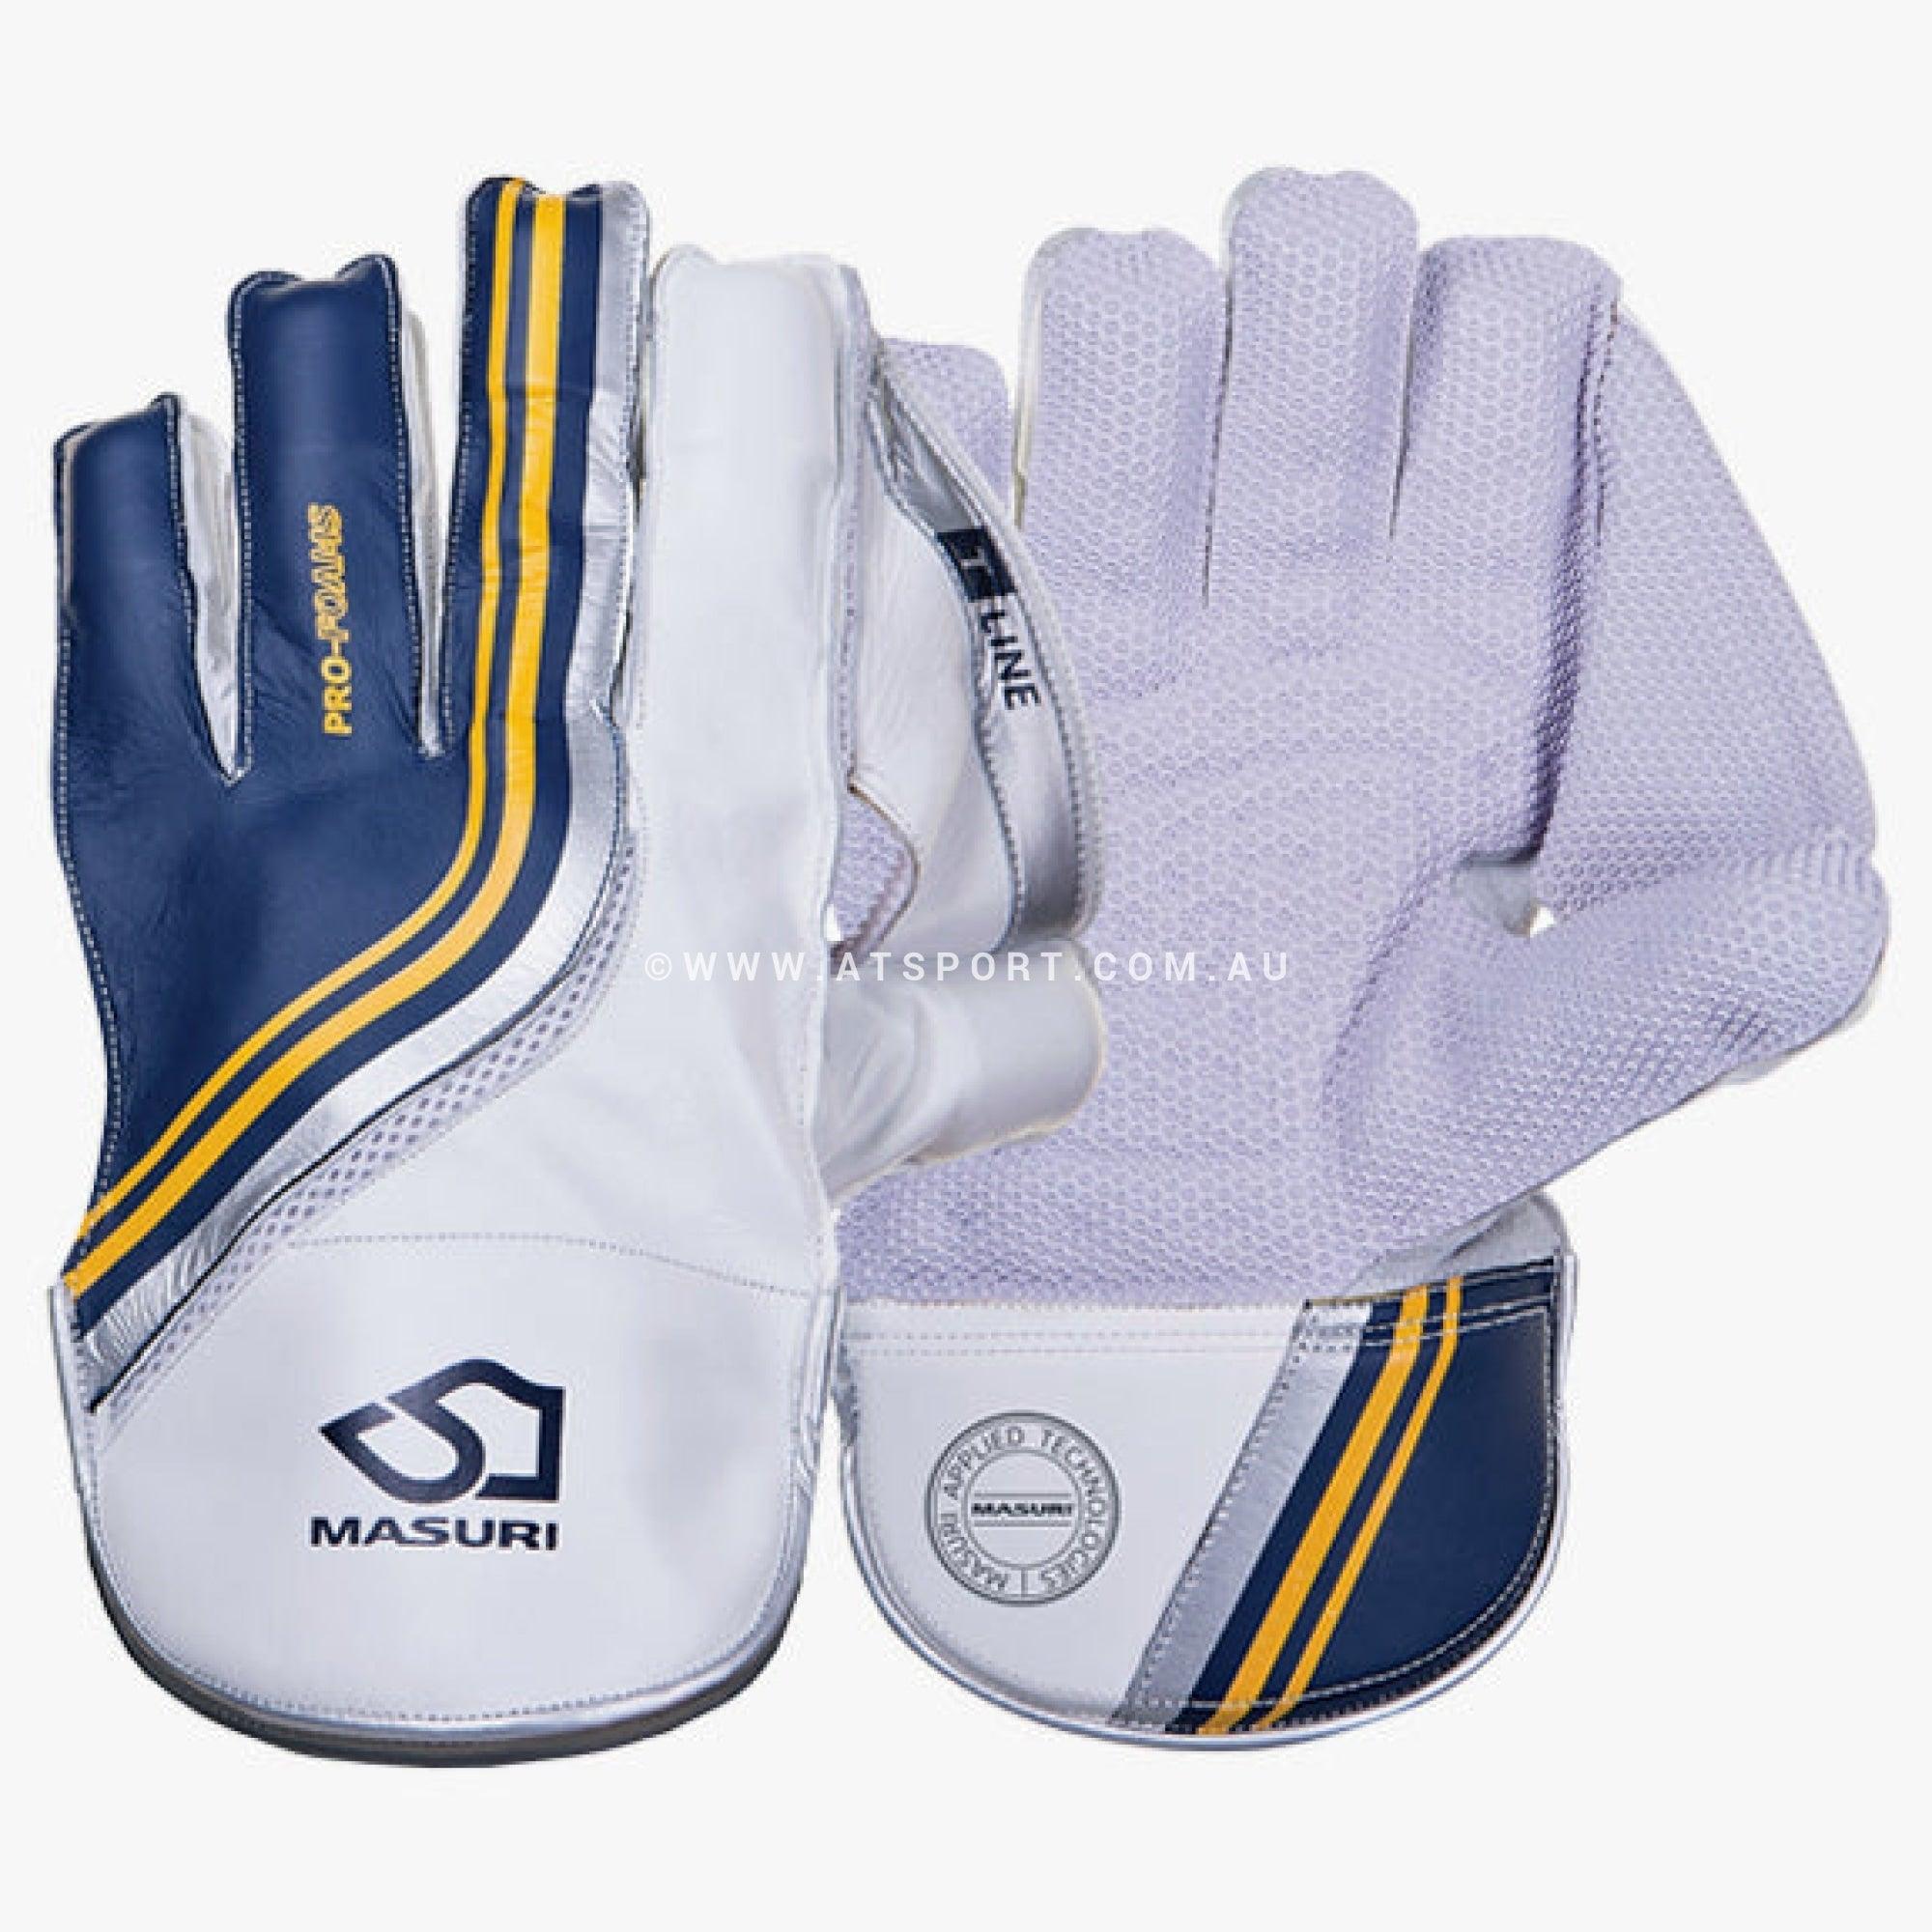 Masuri T LINE WHITE Wicket Keeping Gloves - ADULT - AT Sports